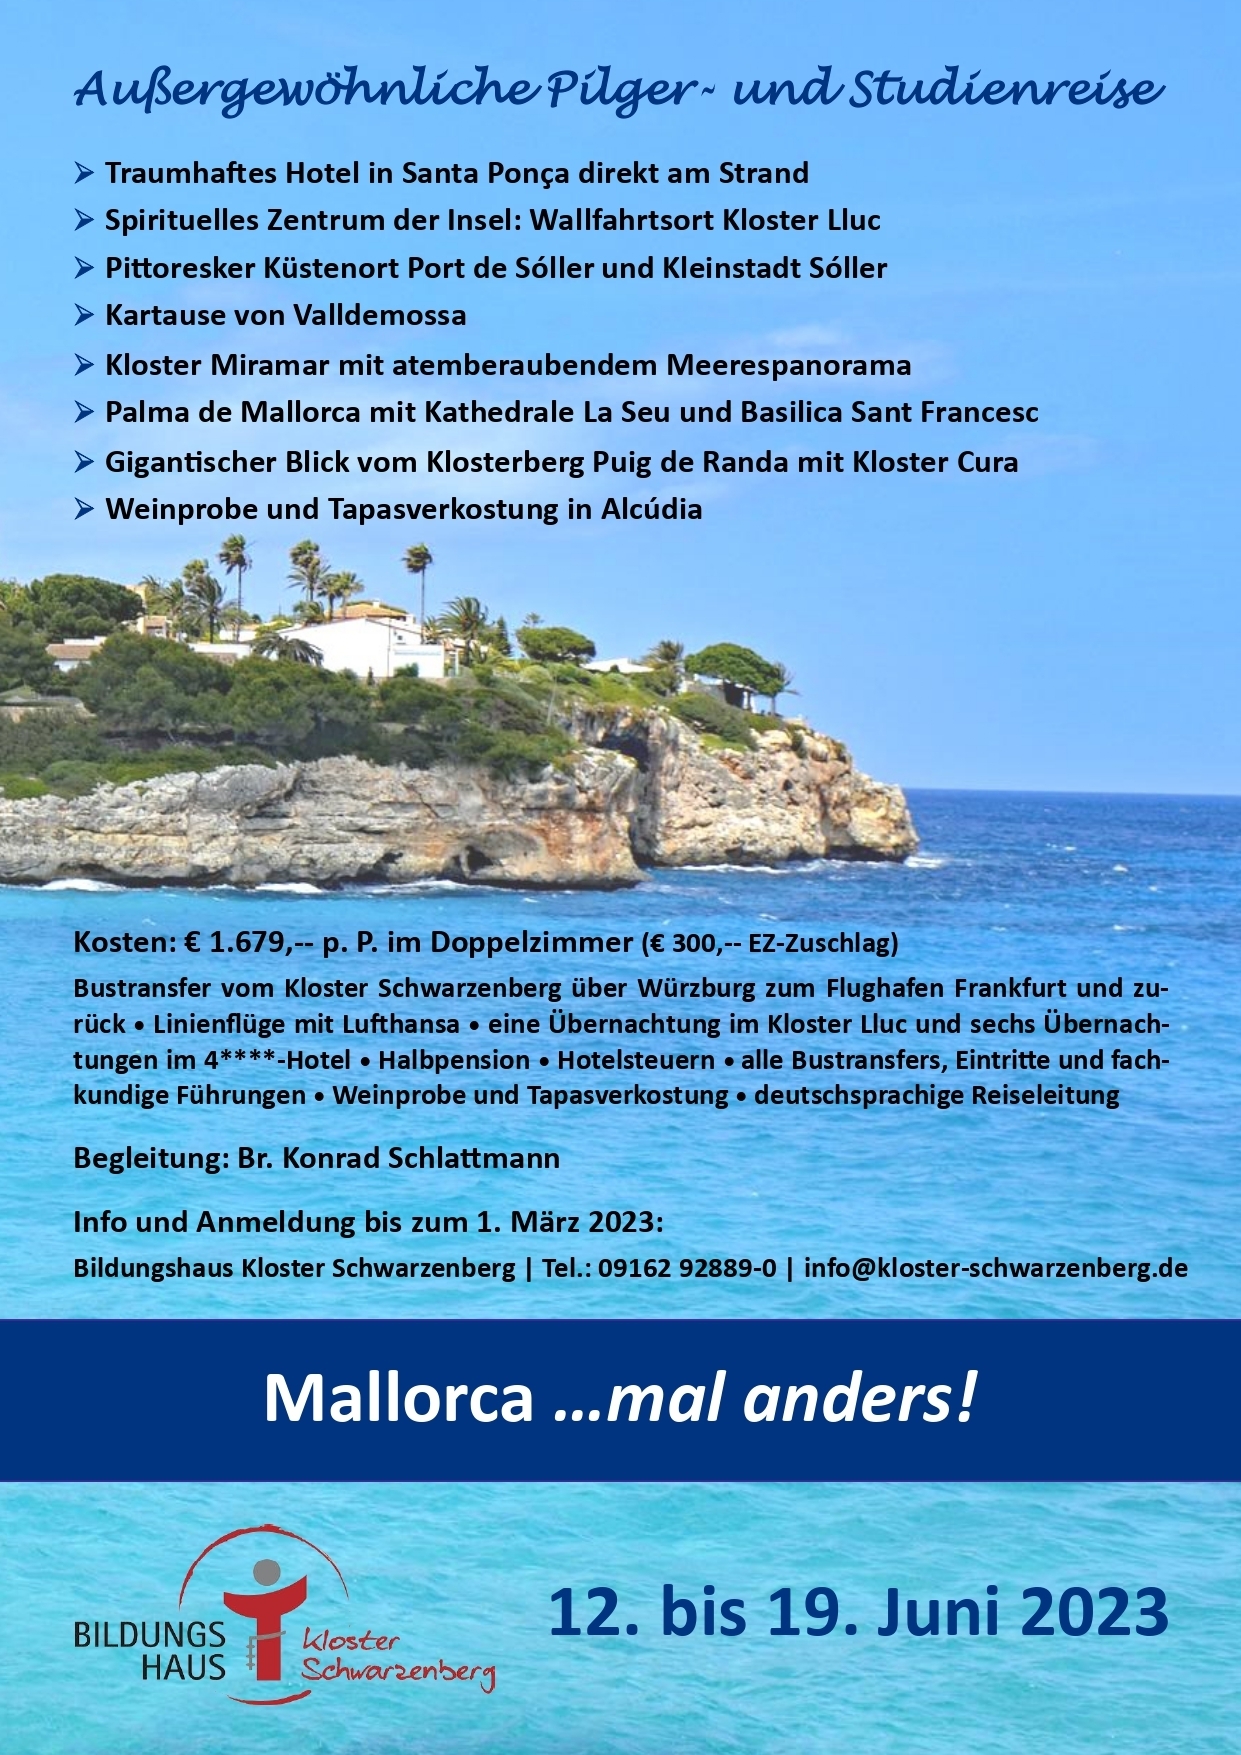 Reise Mallorca Plakat A4 7 pages to jpg 0001